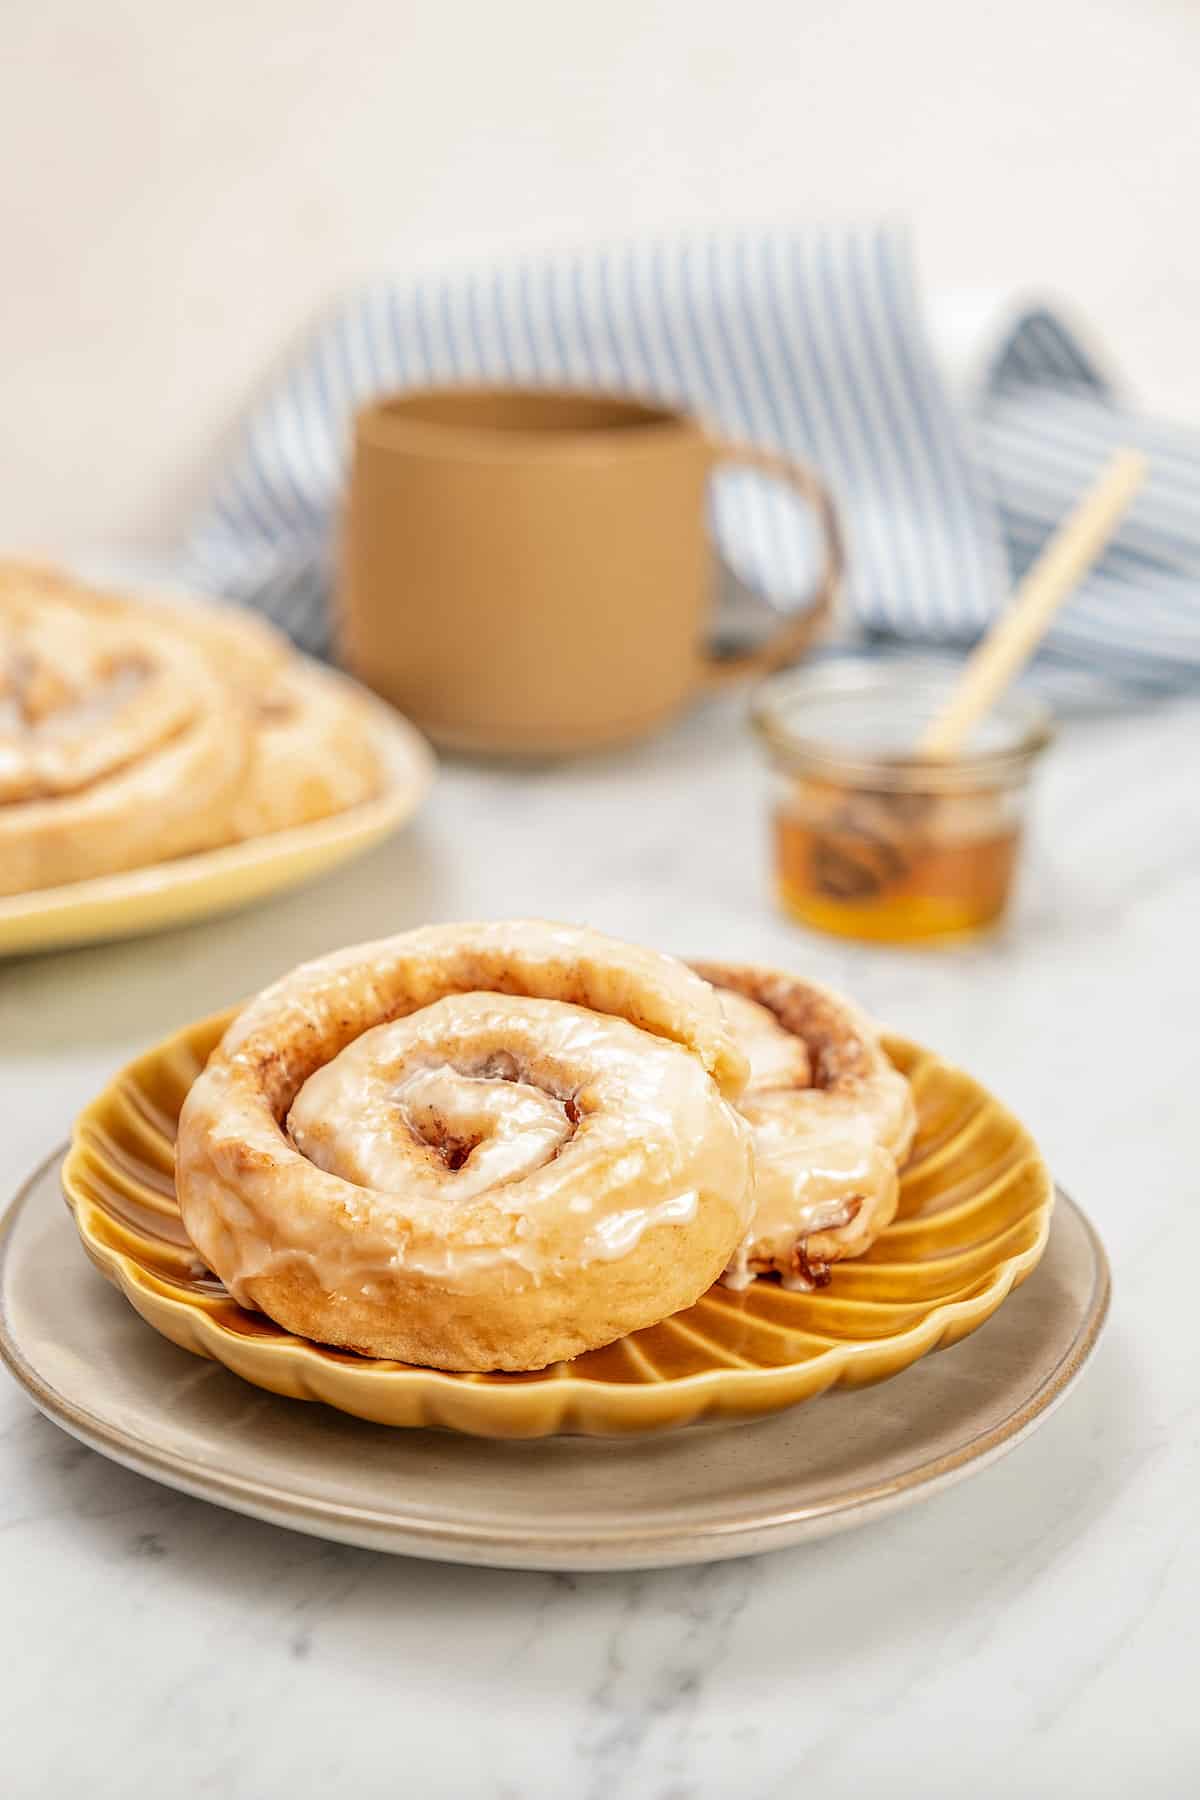 Two gluten-free honey buns on a brown plate with a coffee mug and jar of honey in the background.